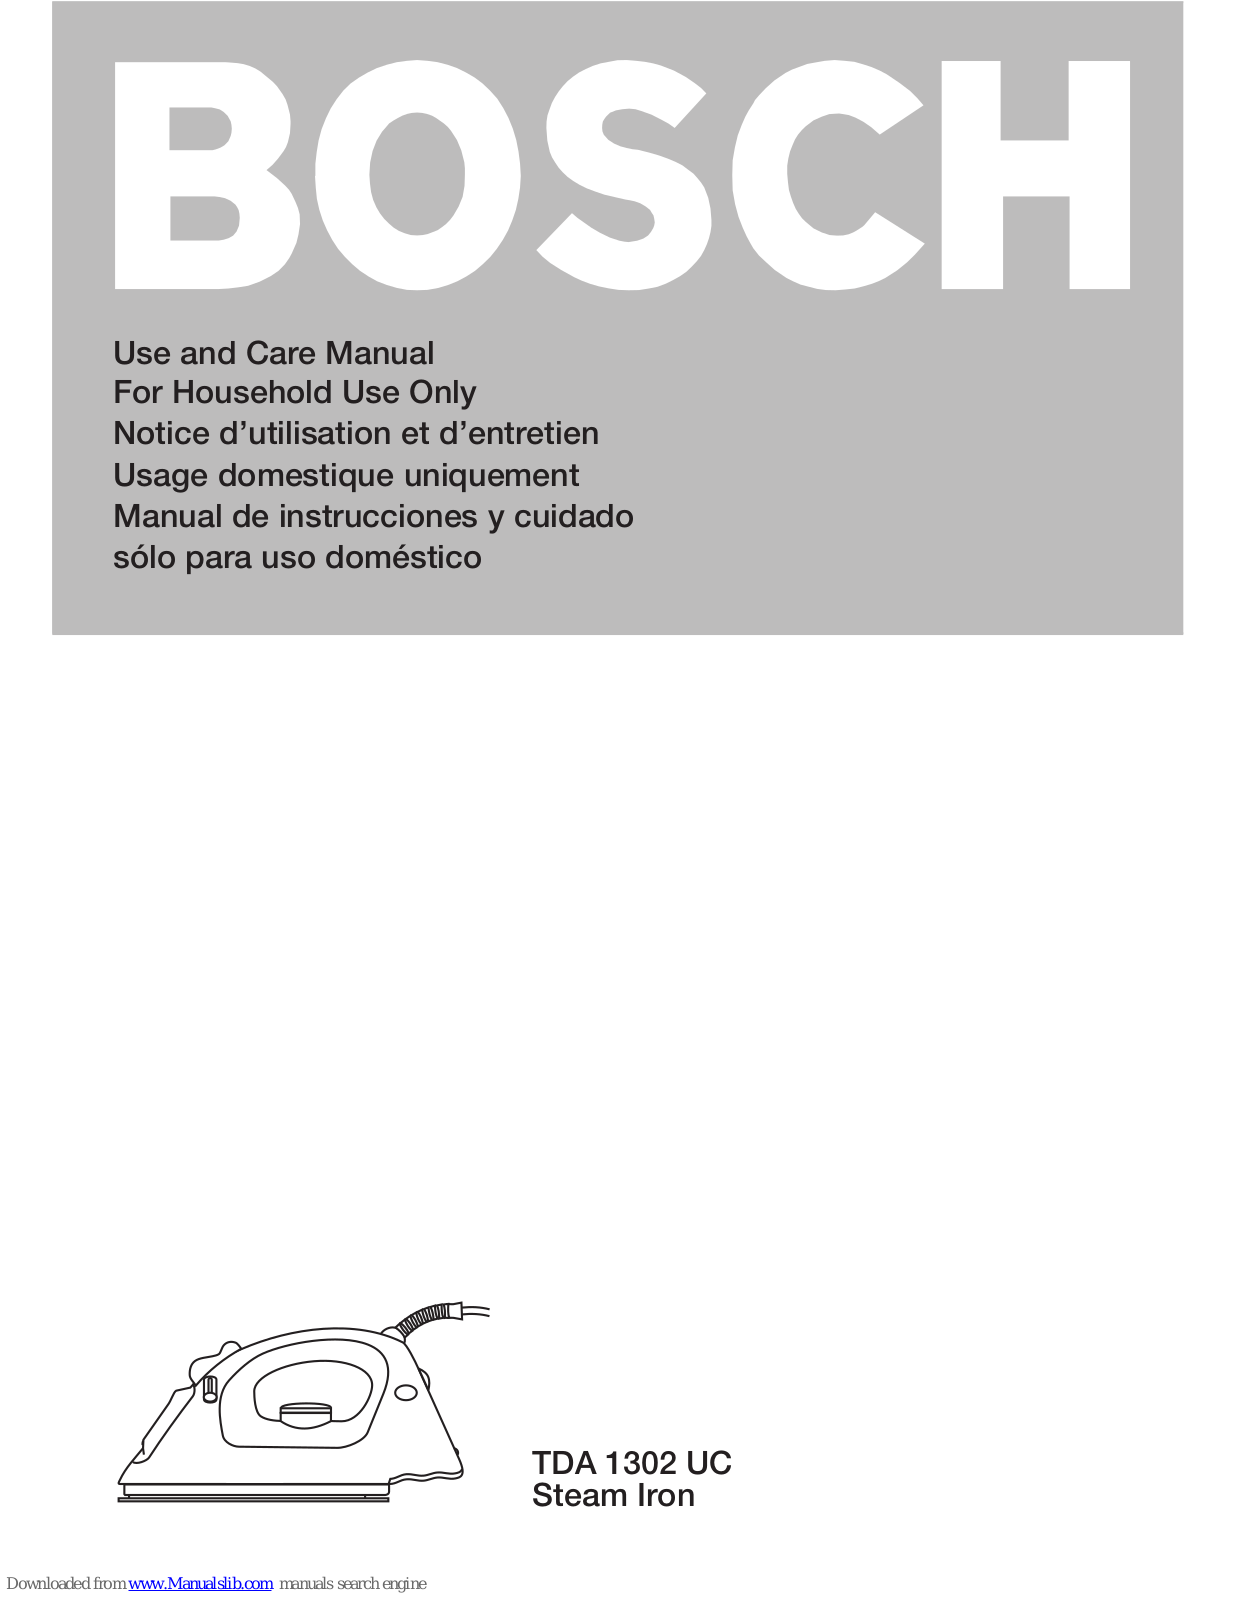 Bosch TDA 1302 UC Use And Care Manual